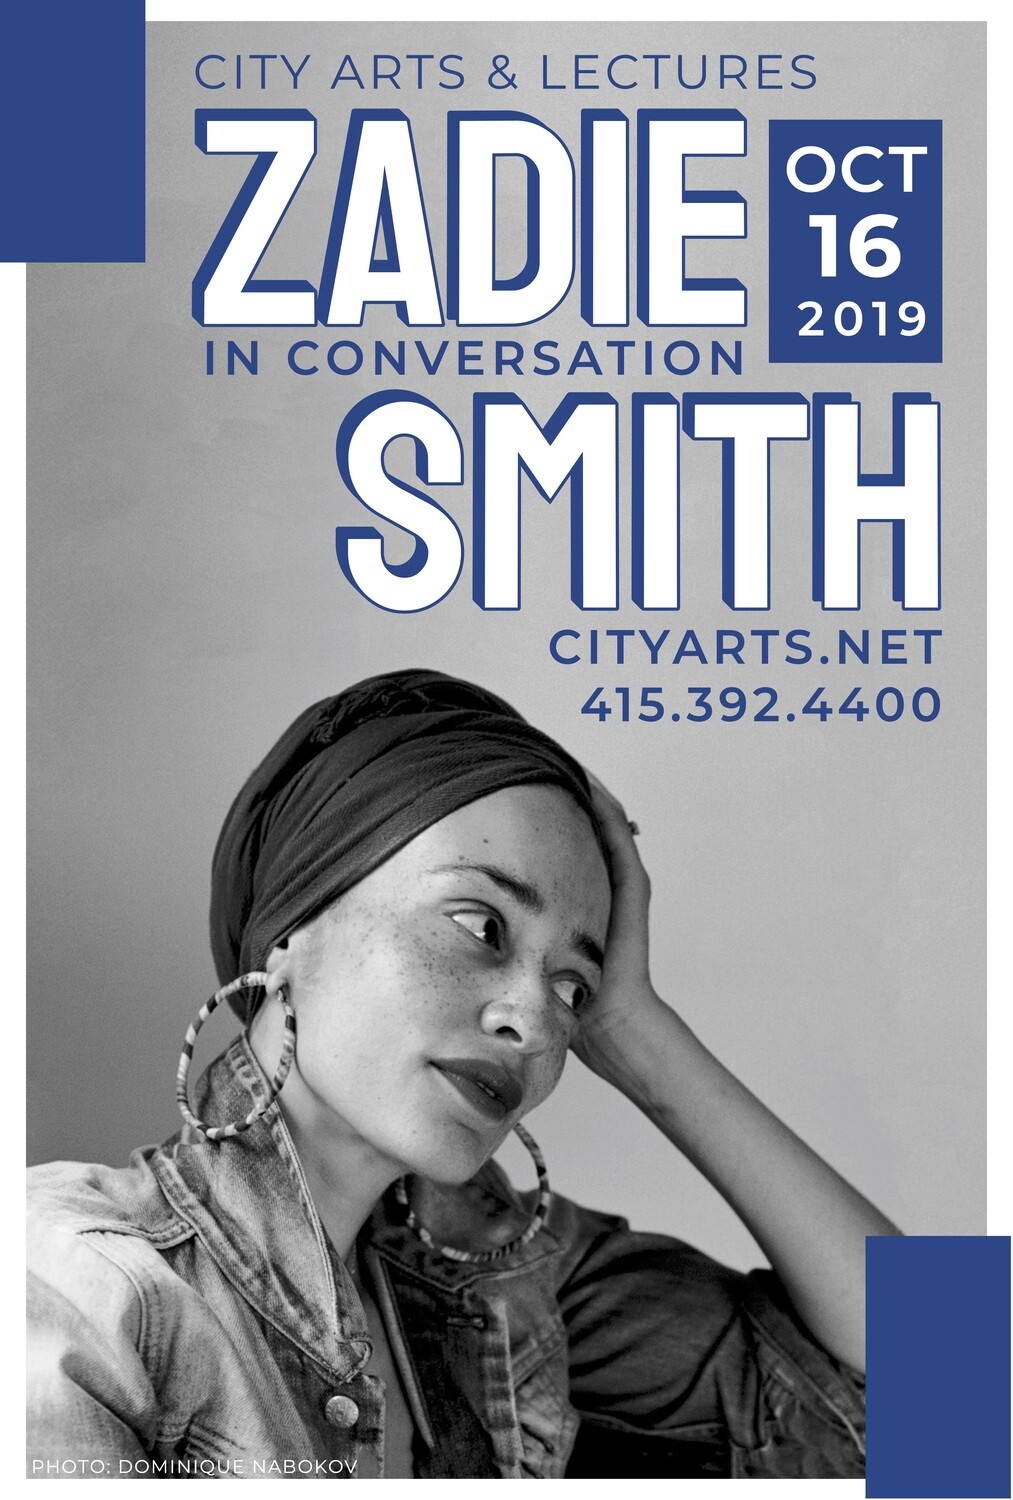 Zadie Smith Event Poster